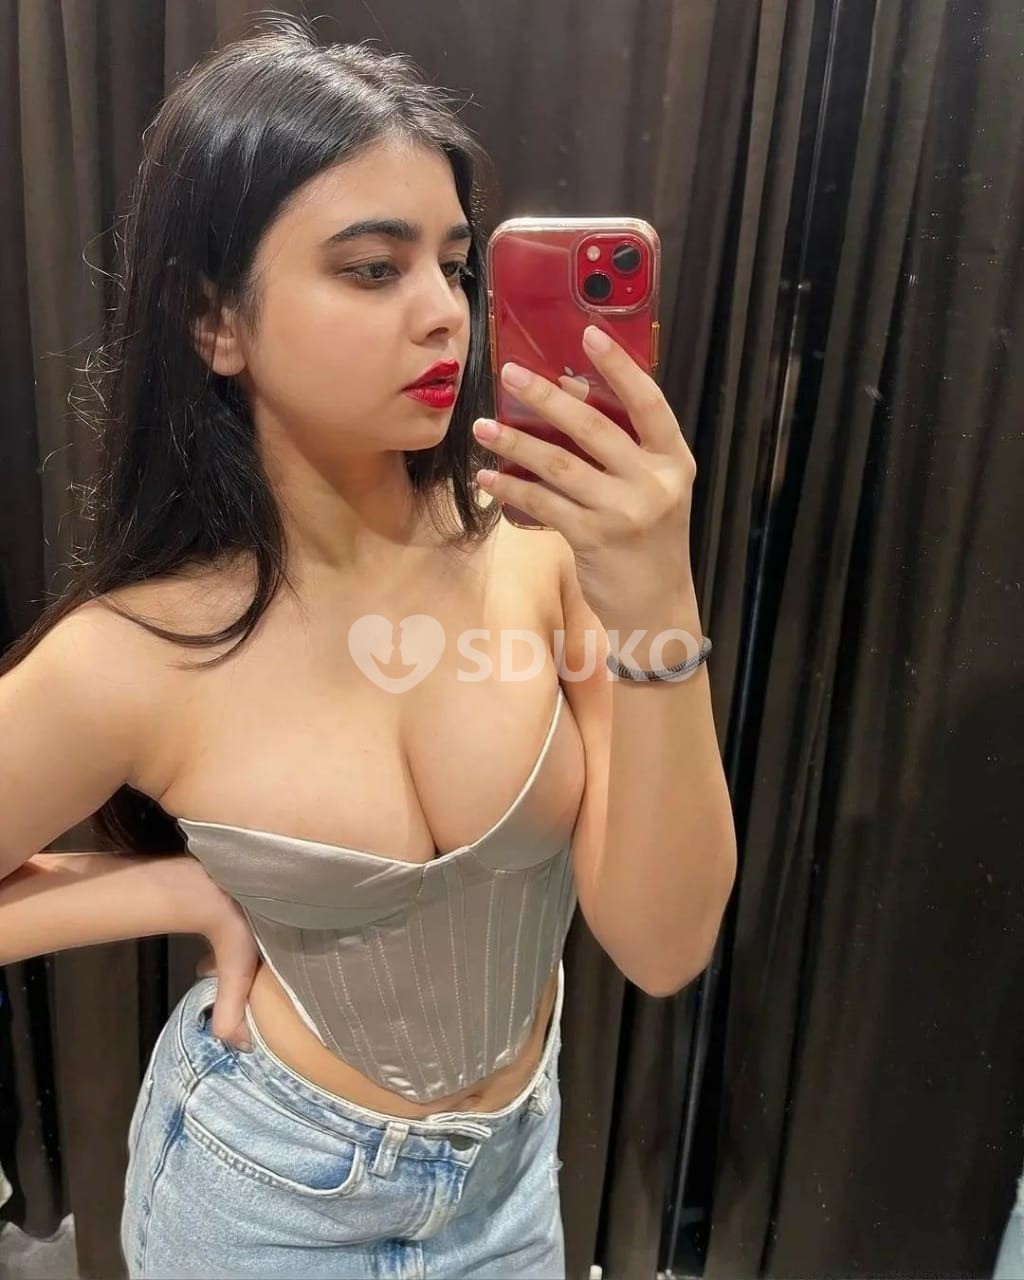 JAIPUR VIP TODAY LOW PRICE&: ESCORT 🥰SERVICE 100% SAFE AND SECURE ANYTIME CALL ME 24 X 7 SERVICE AVAILABLE 100% SAFE